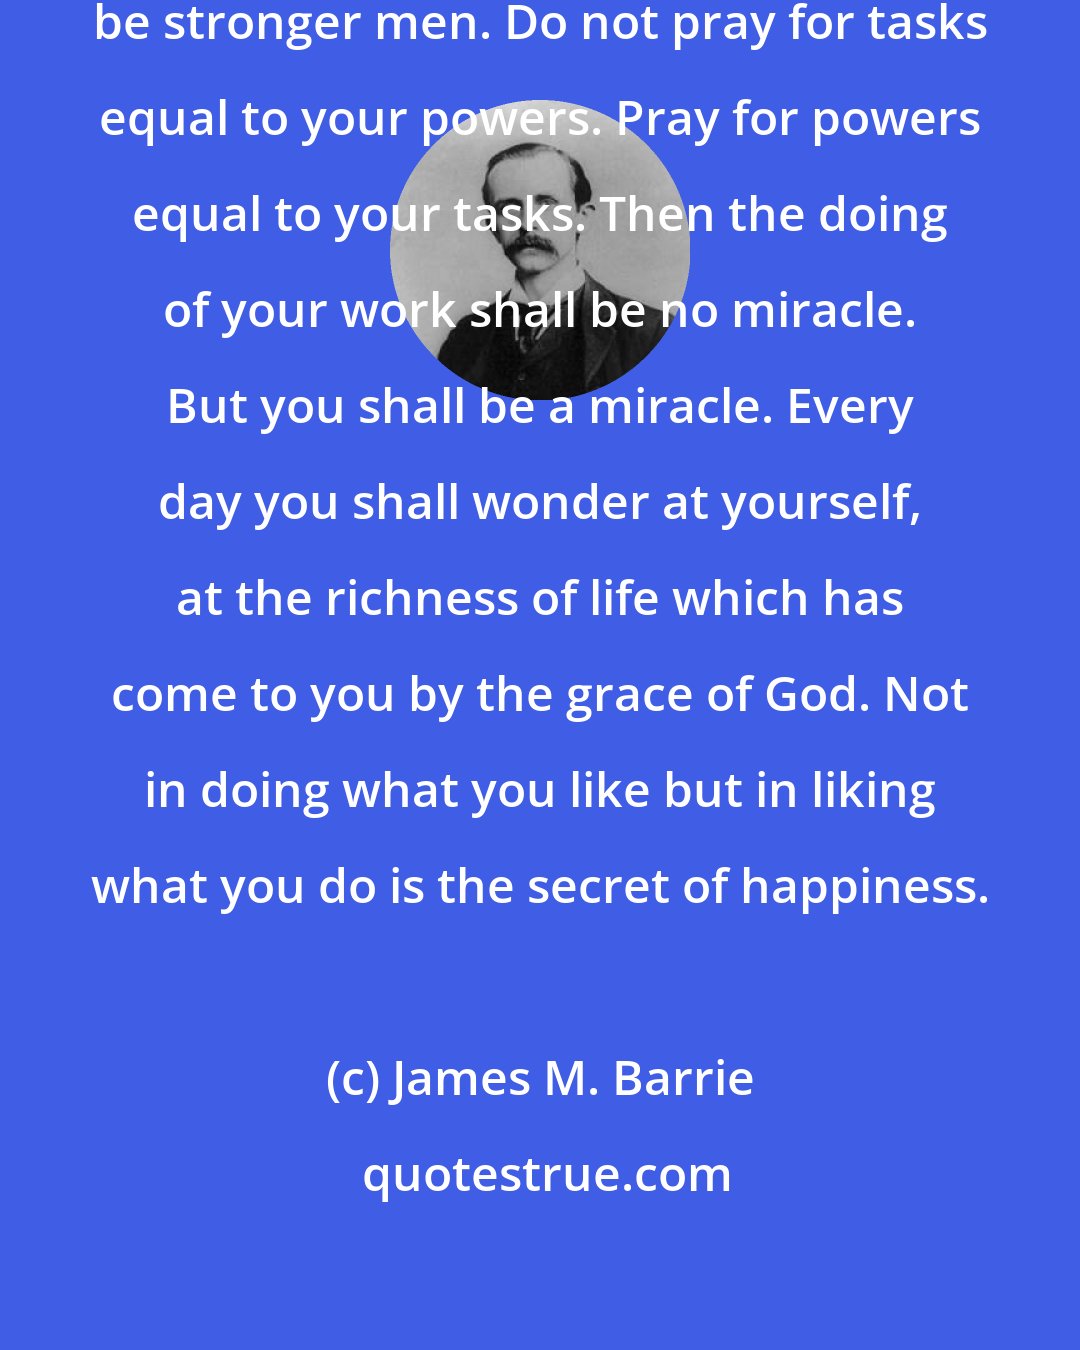 James M. Barrie: Do not pray for easy lives. Pray to be stronger men. Do not pray for tasks equal to your powers. Pray for powers equal to your tasks. Then the doing of your work shall be no miracle. But you shall be a miracle. Every day you shall wonder at yourself, at the richness of life which has come to you by the grace of God. Not in doing what you like but in liking what you do is the secret of happiness.